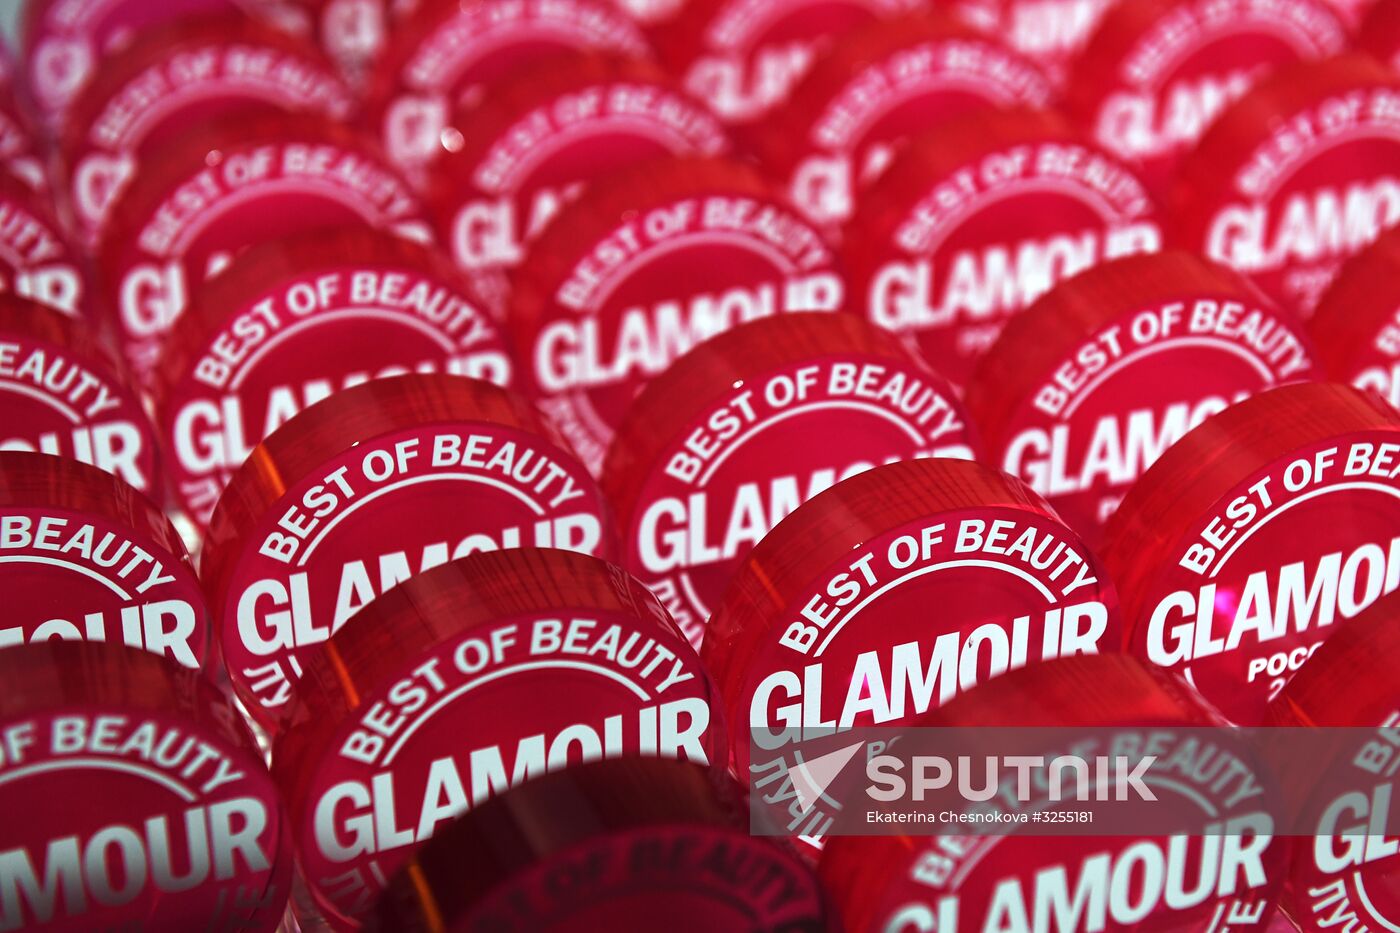 Glamour Best of Beauty awards